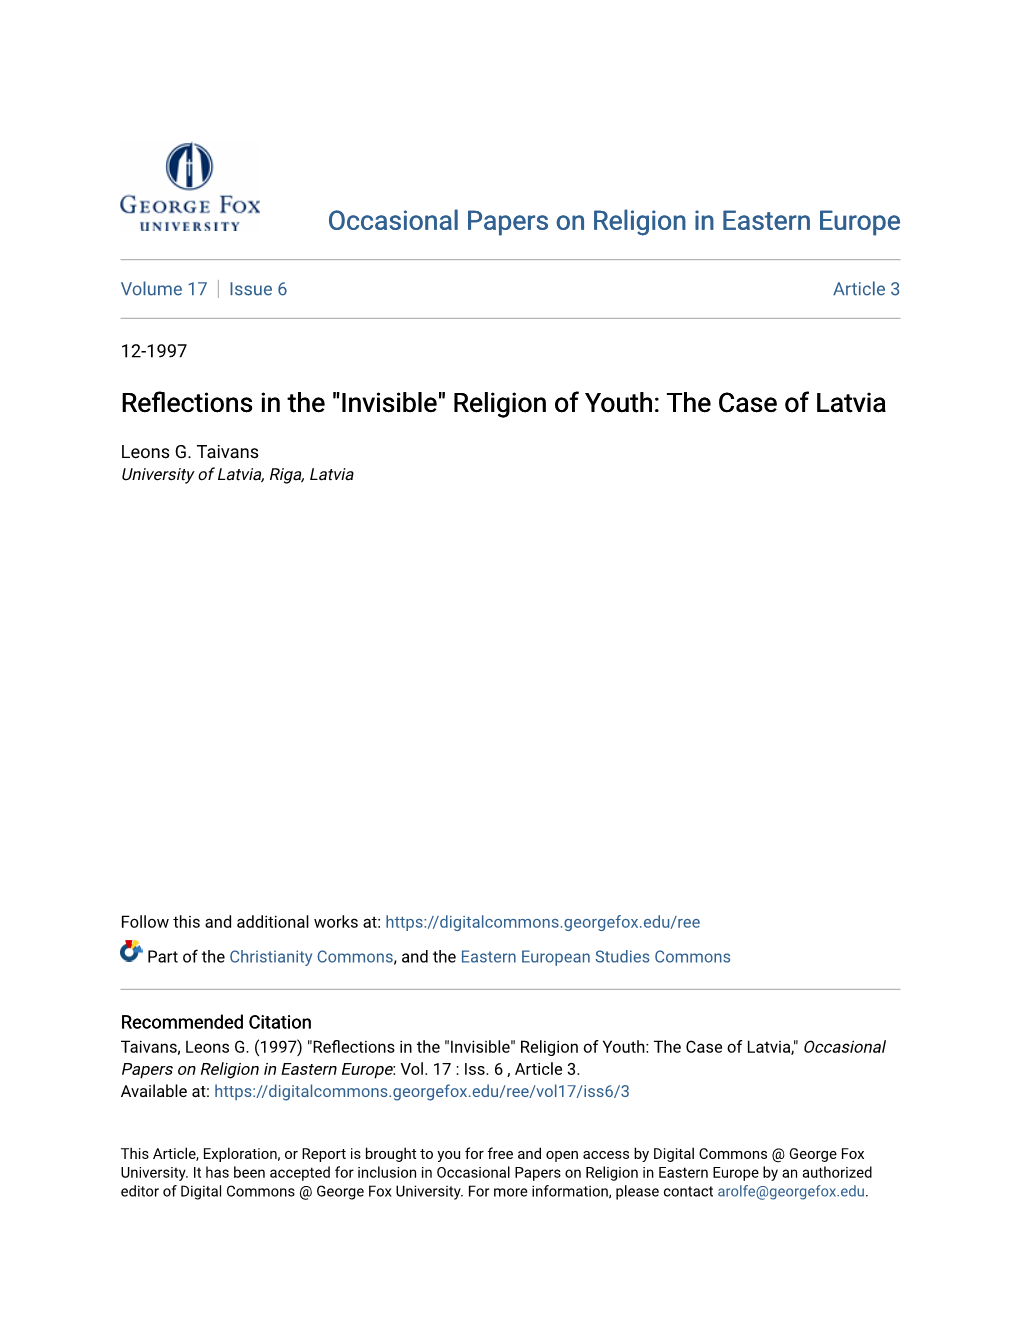 Reflections in the "Invisible" Religion of Youth: the Case of Latvia